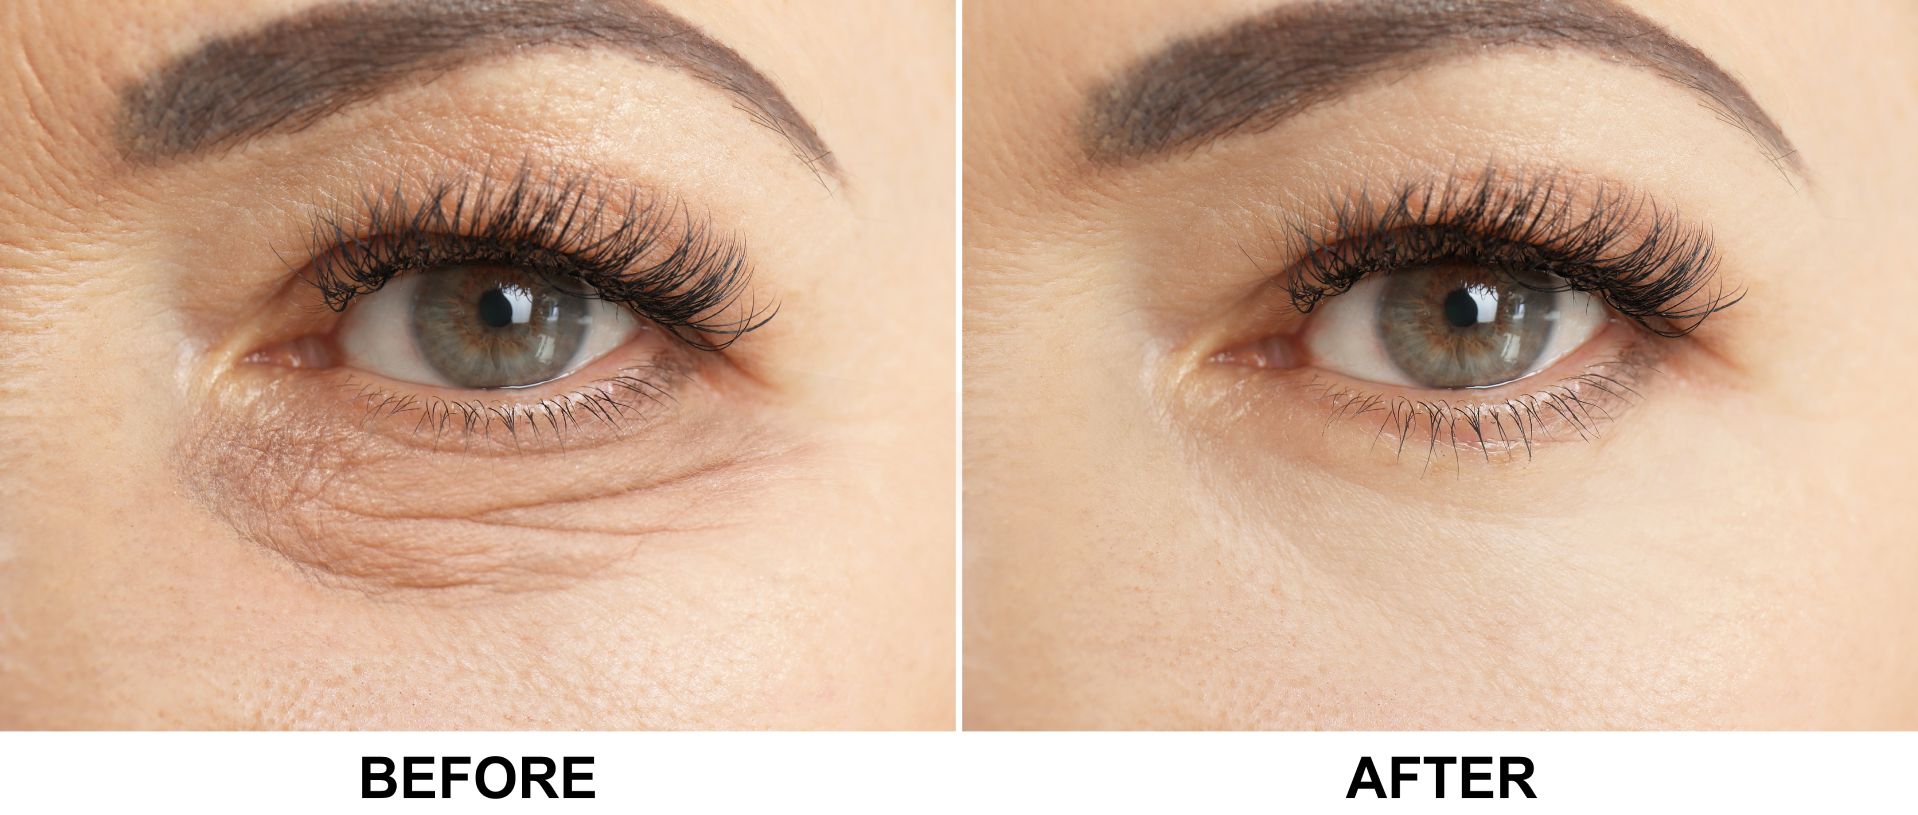 mature woman before and after blepharoplasty procedure